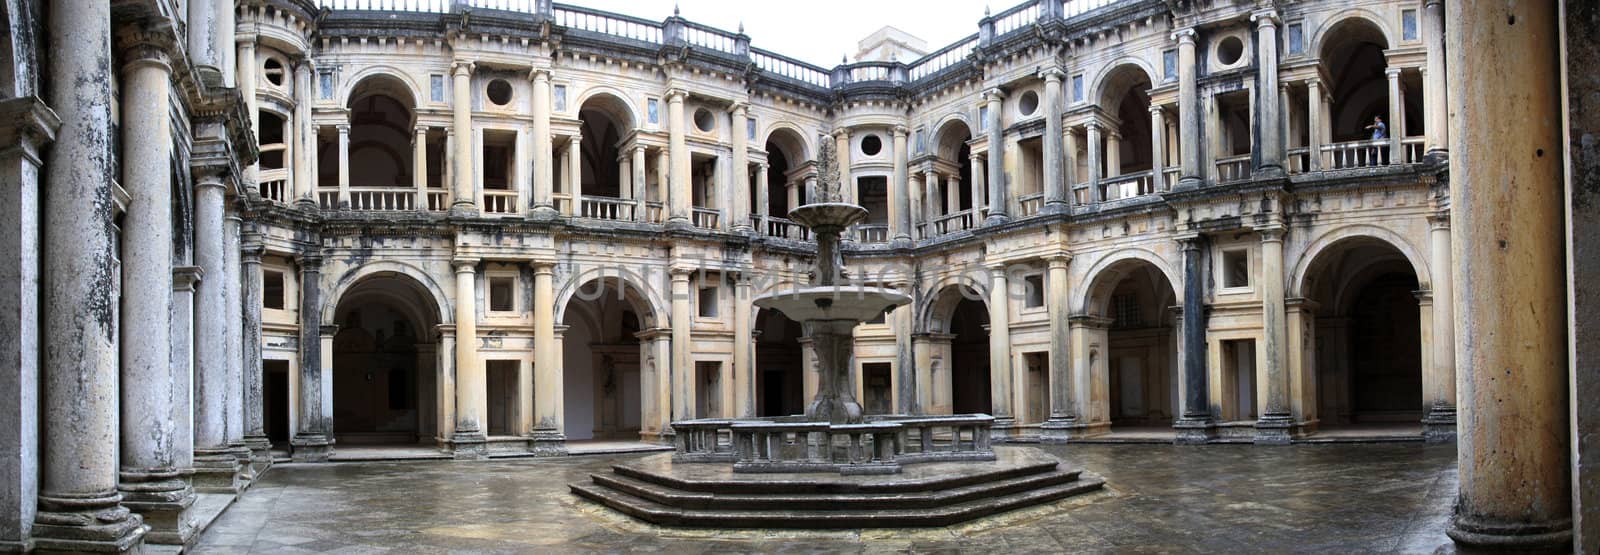 View of the main central square of the inside of the Convent of Christ on Tomar, Portugal.